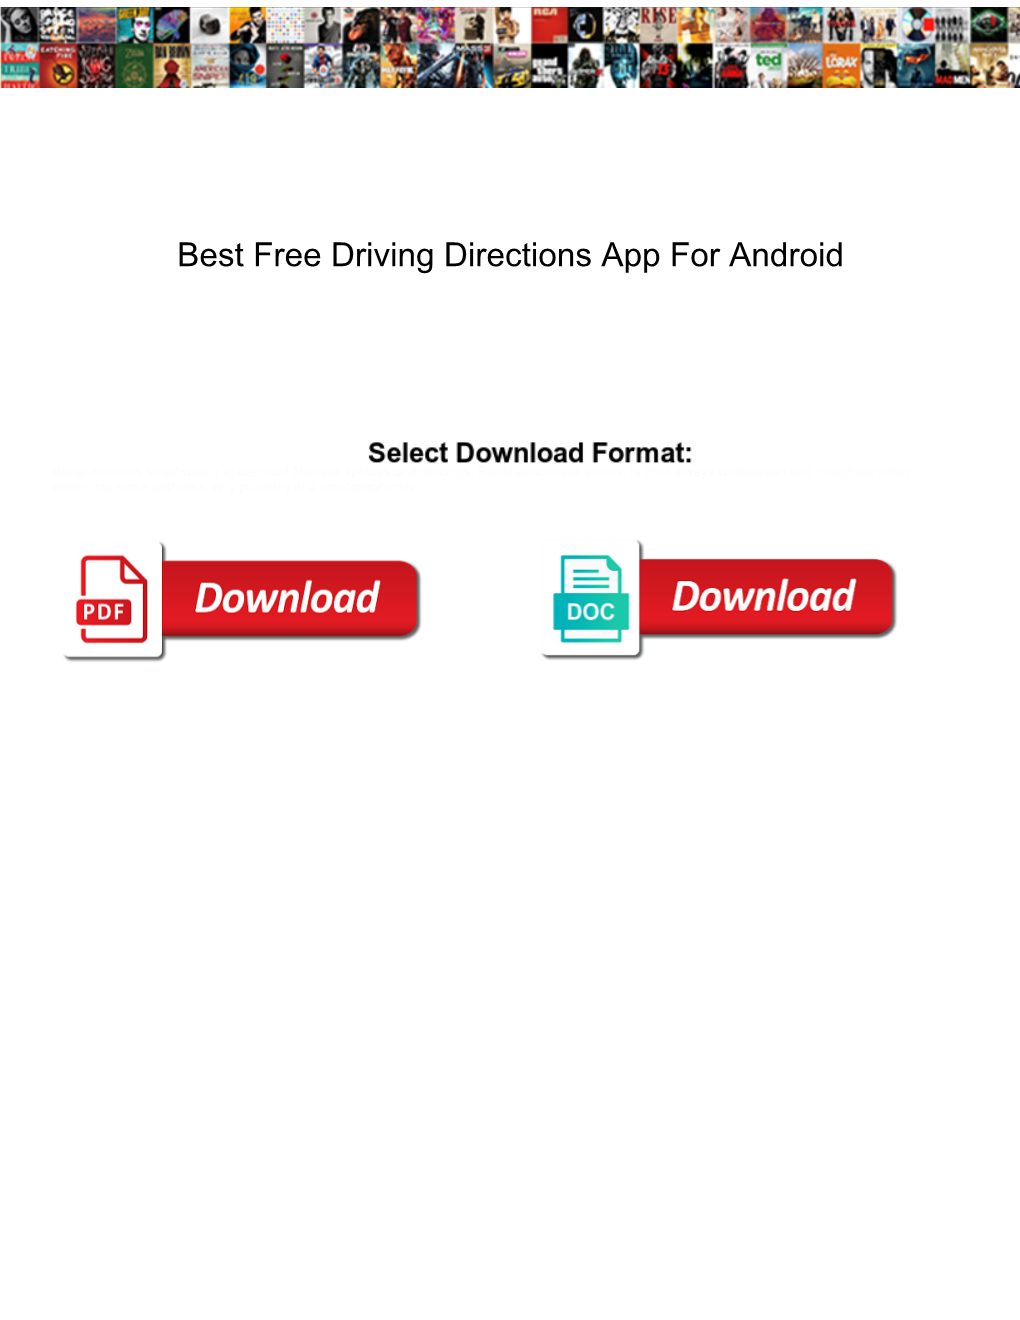 Best Free Driving Directions App for Android